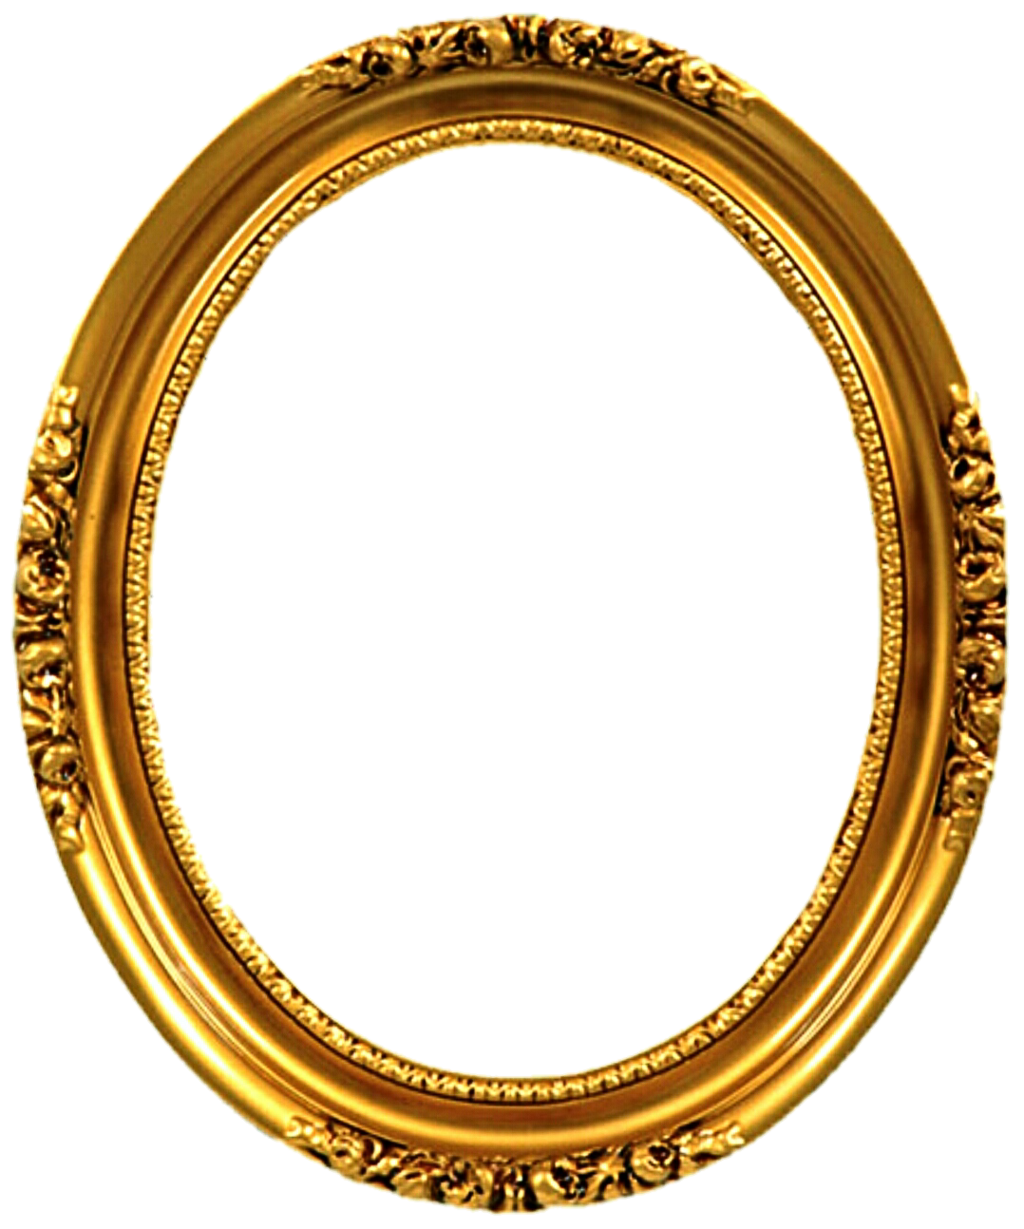 Gold Victorian Frame By Jeanicebartzen27 Gold Victorian Frame By Jeanicebartzen27 - Victorian Frame, Transparent background PNG HD thumbnail